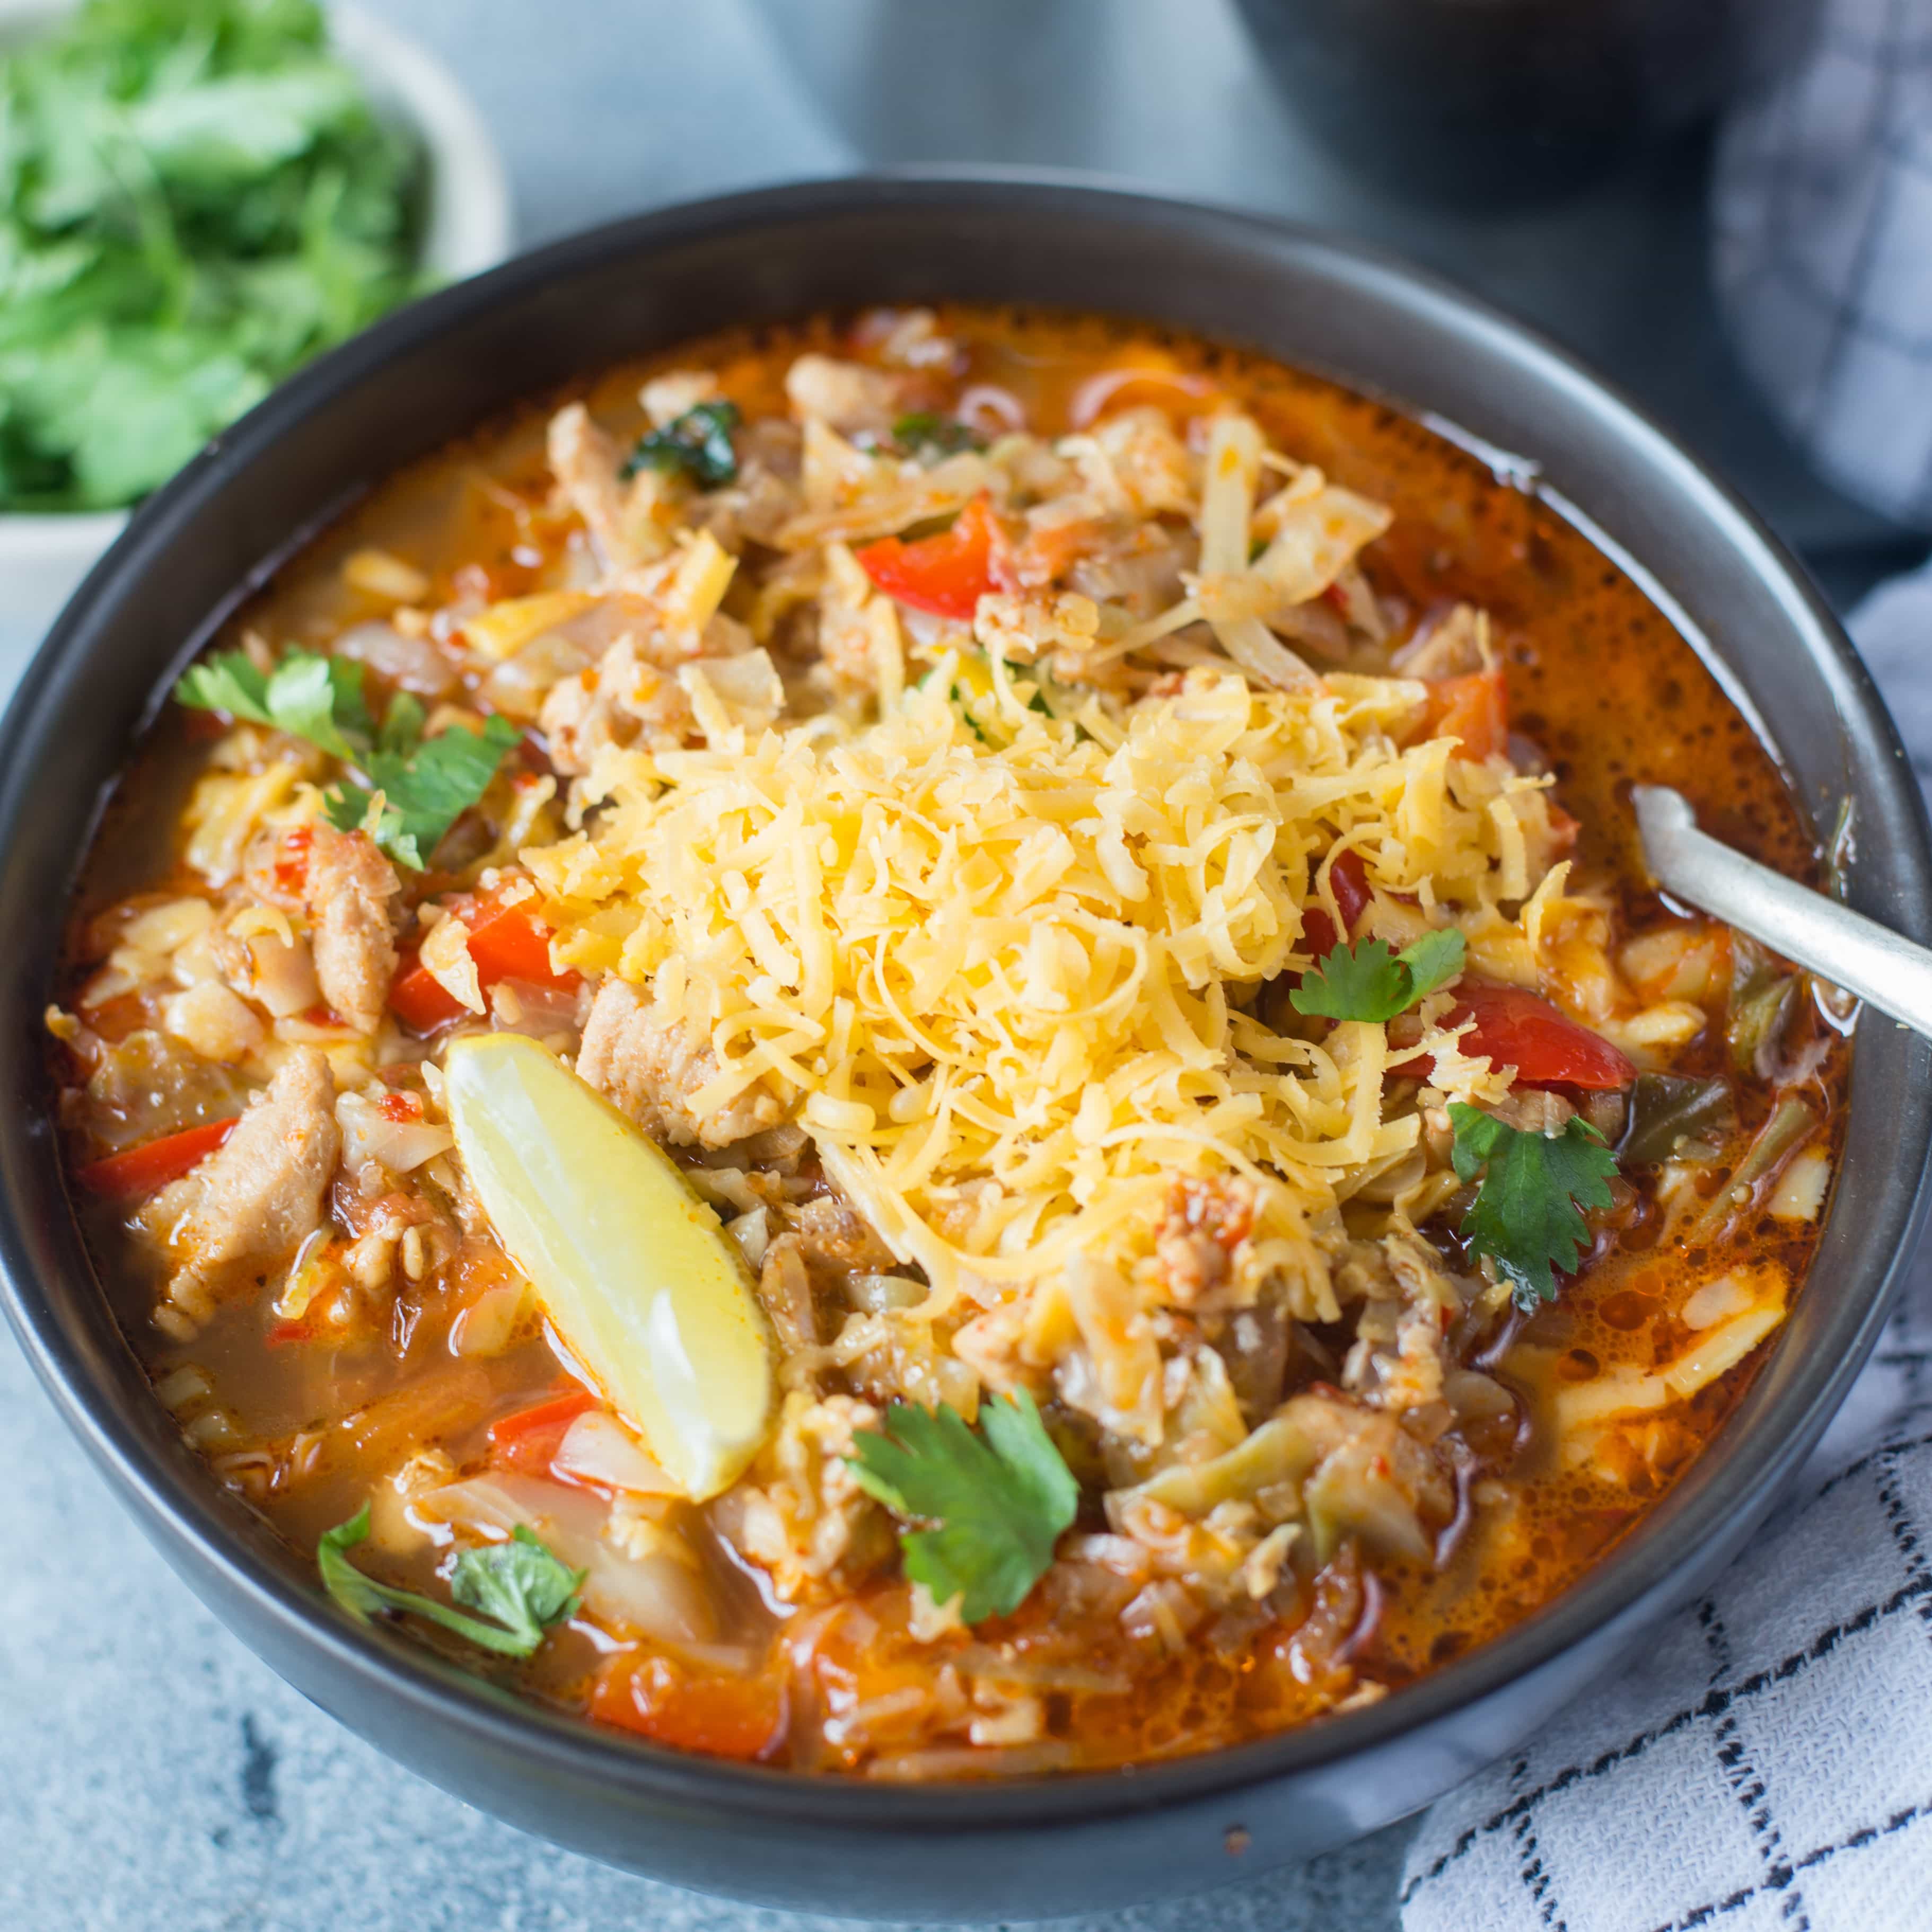 This Low Carb Chicken Taco Soup with cabbage is light, healthy and perfect if you are on a weight loss journey. It is also a Keto friendly recipe. Just add Corn, Kidney beans and top it with nachos to make it more wholesome.